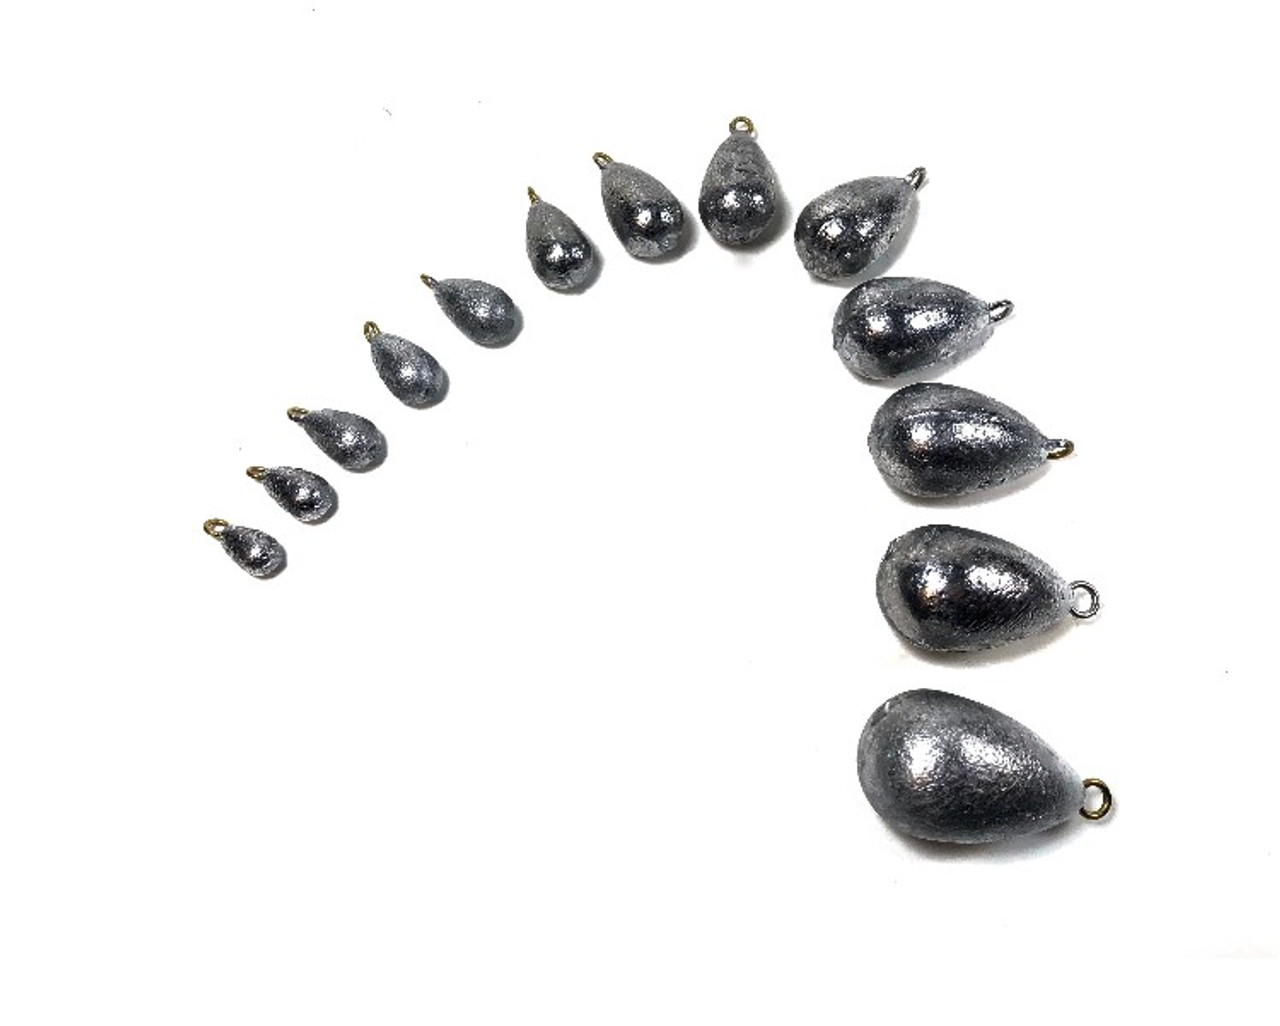 Bass Casting Bell Sinkers Small Packaged Lead Fishing Weights Select Size